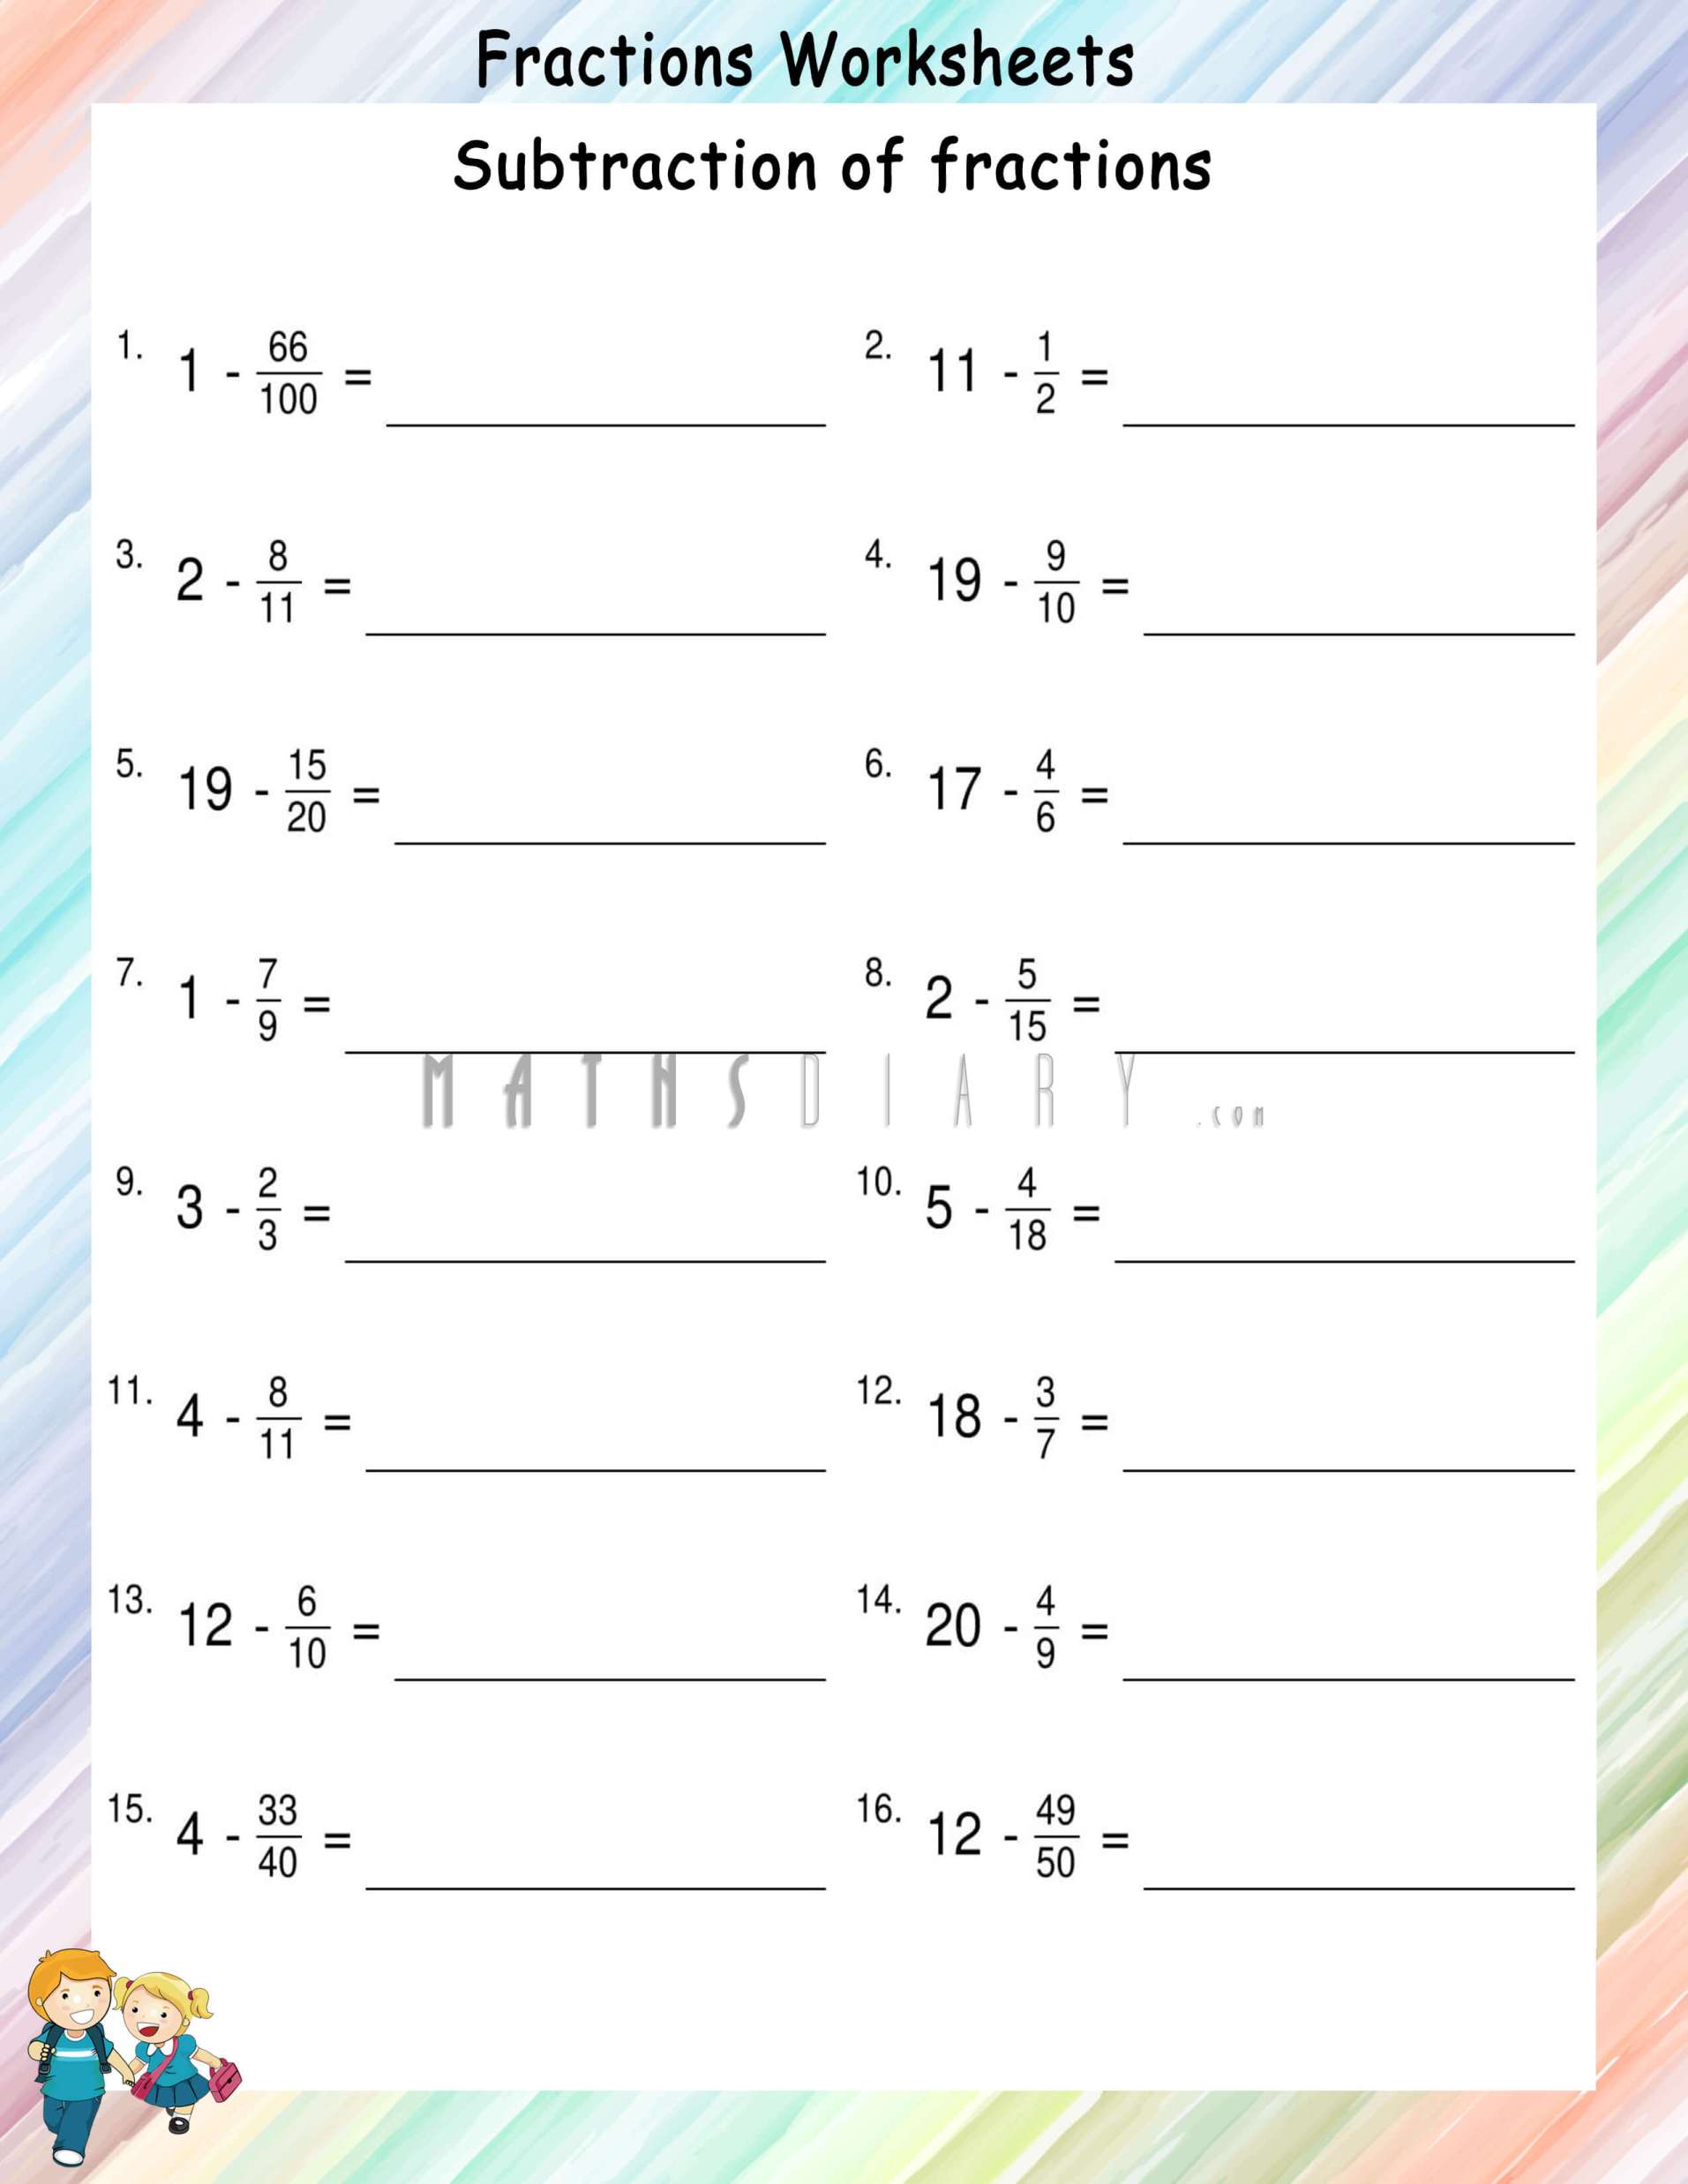 Subtracting Fractions From Whole Numbers Worksheet Pdf